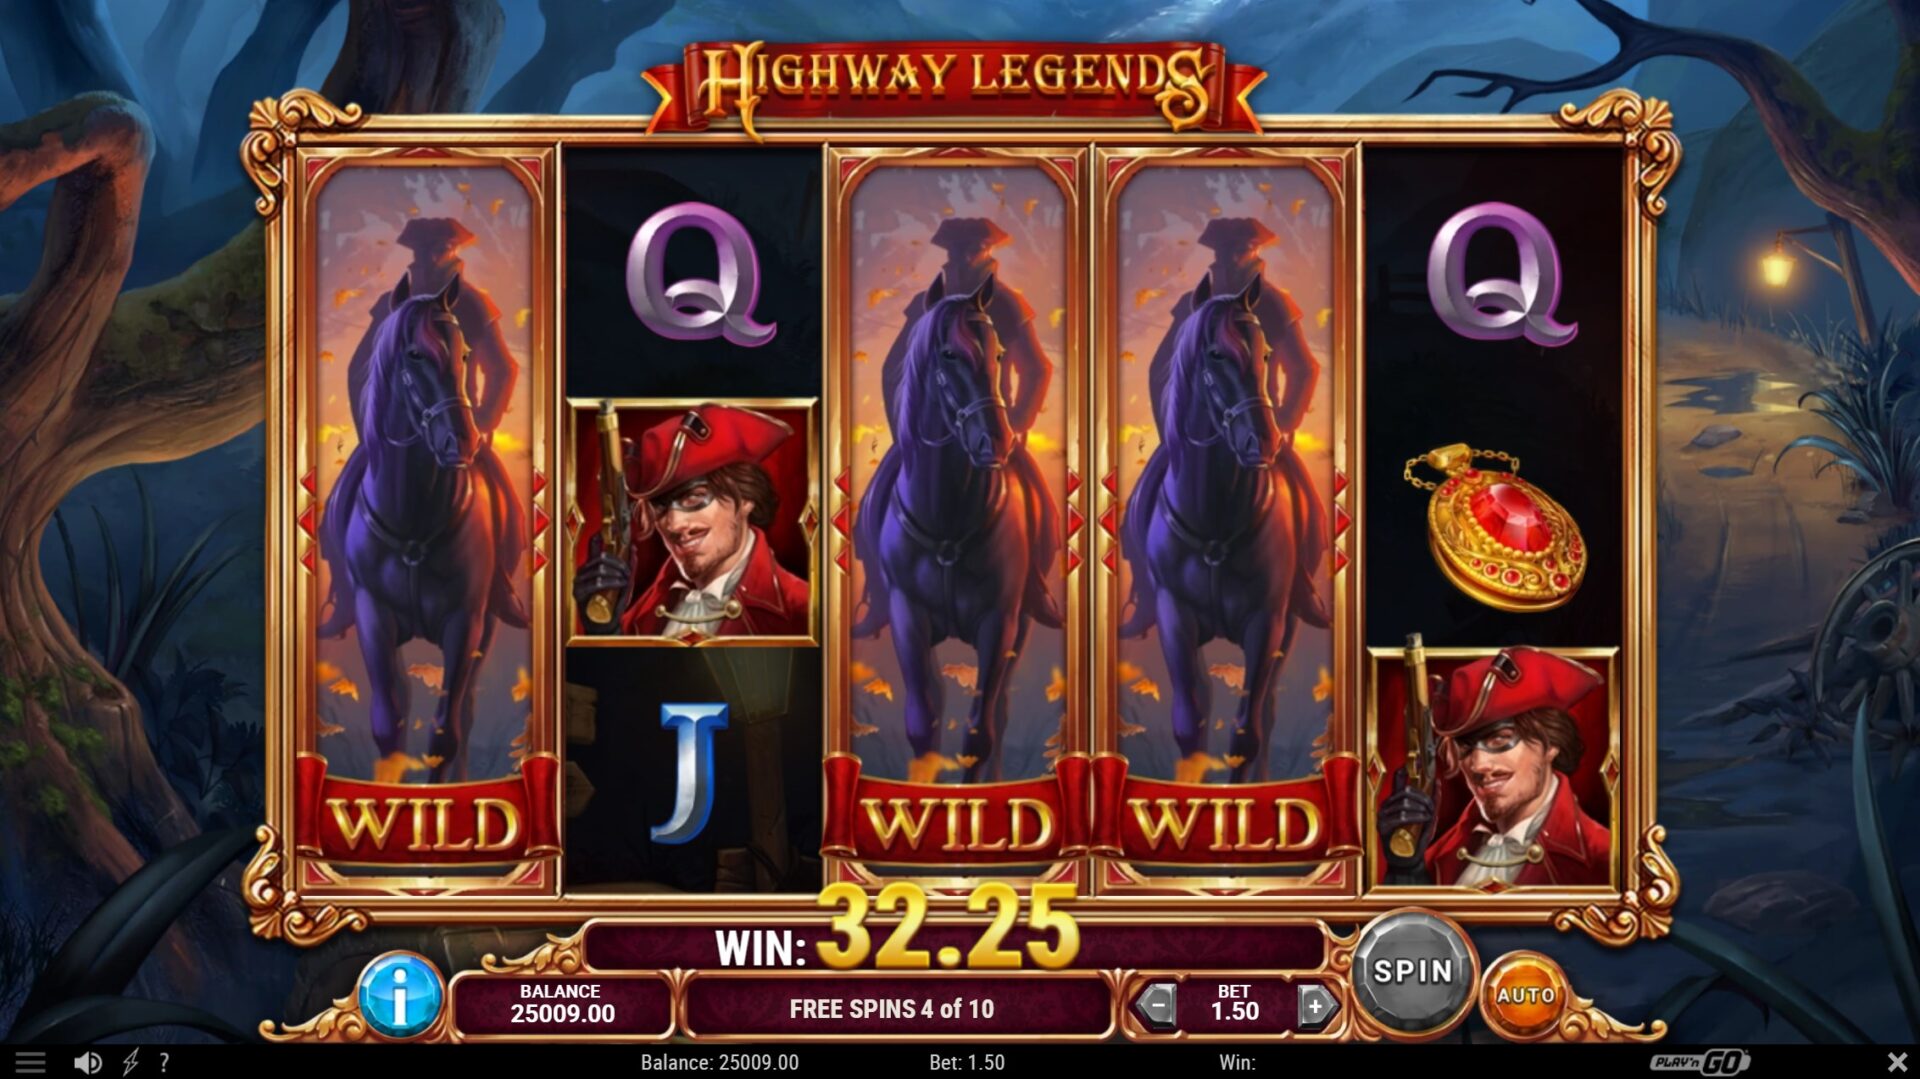 Highway Legends Slot: Stacked Wild Hold Up Free Spins